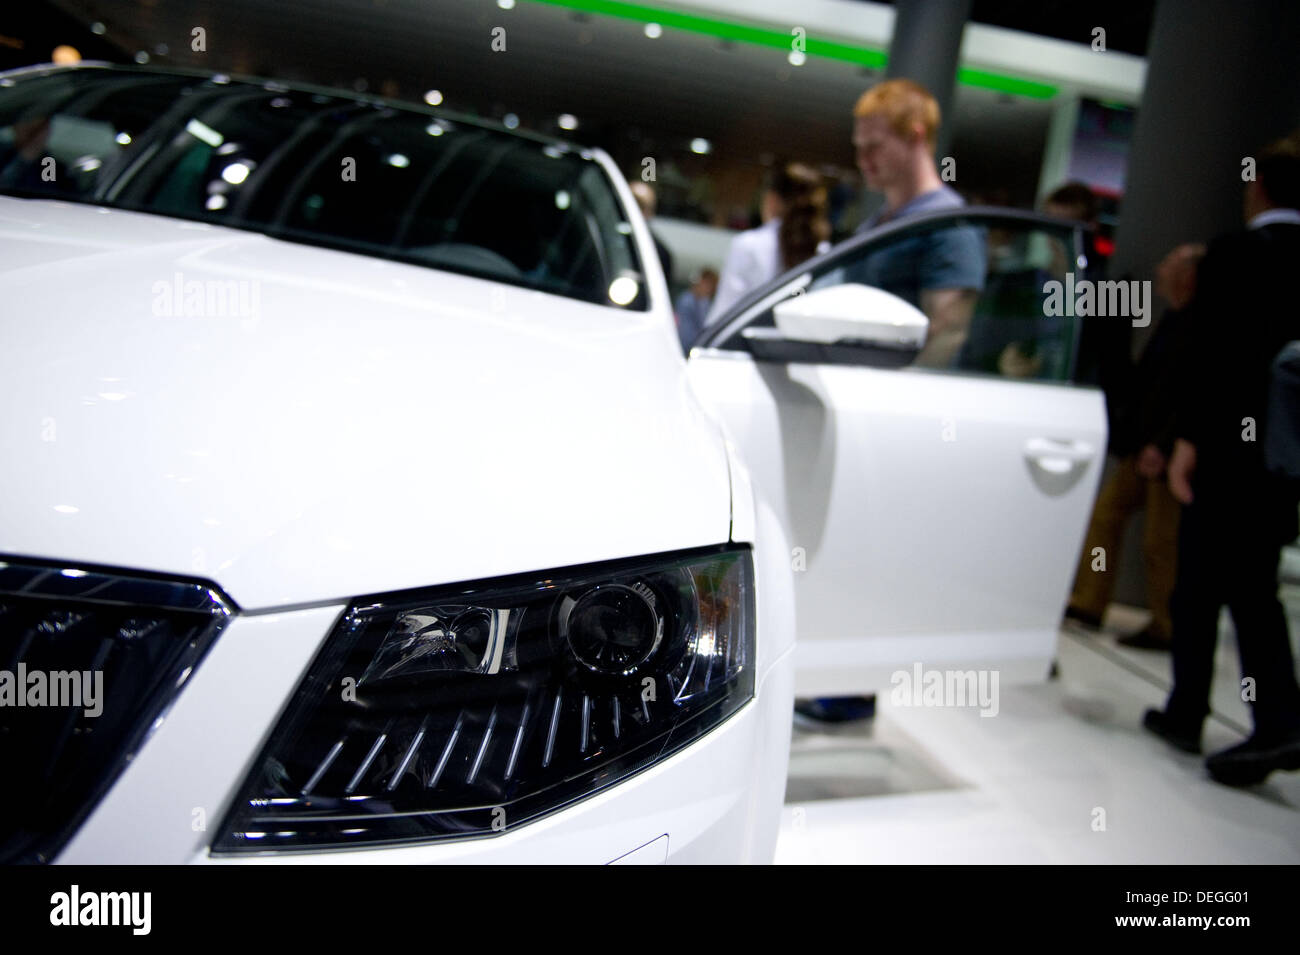 65th International Motor Show in Frankfurt, Germany. September 17th, 2013. The IAA is the world's largest exhibition for the auto industry. Nearly 1100 exhibitors from all over the world present on 12th to 22nd of September new models and futuristic prototypes. Photo: Jan Haas/dpa/Alamy Live News Stock Photo